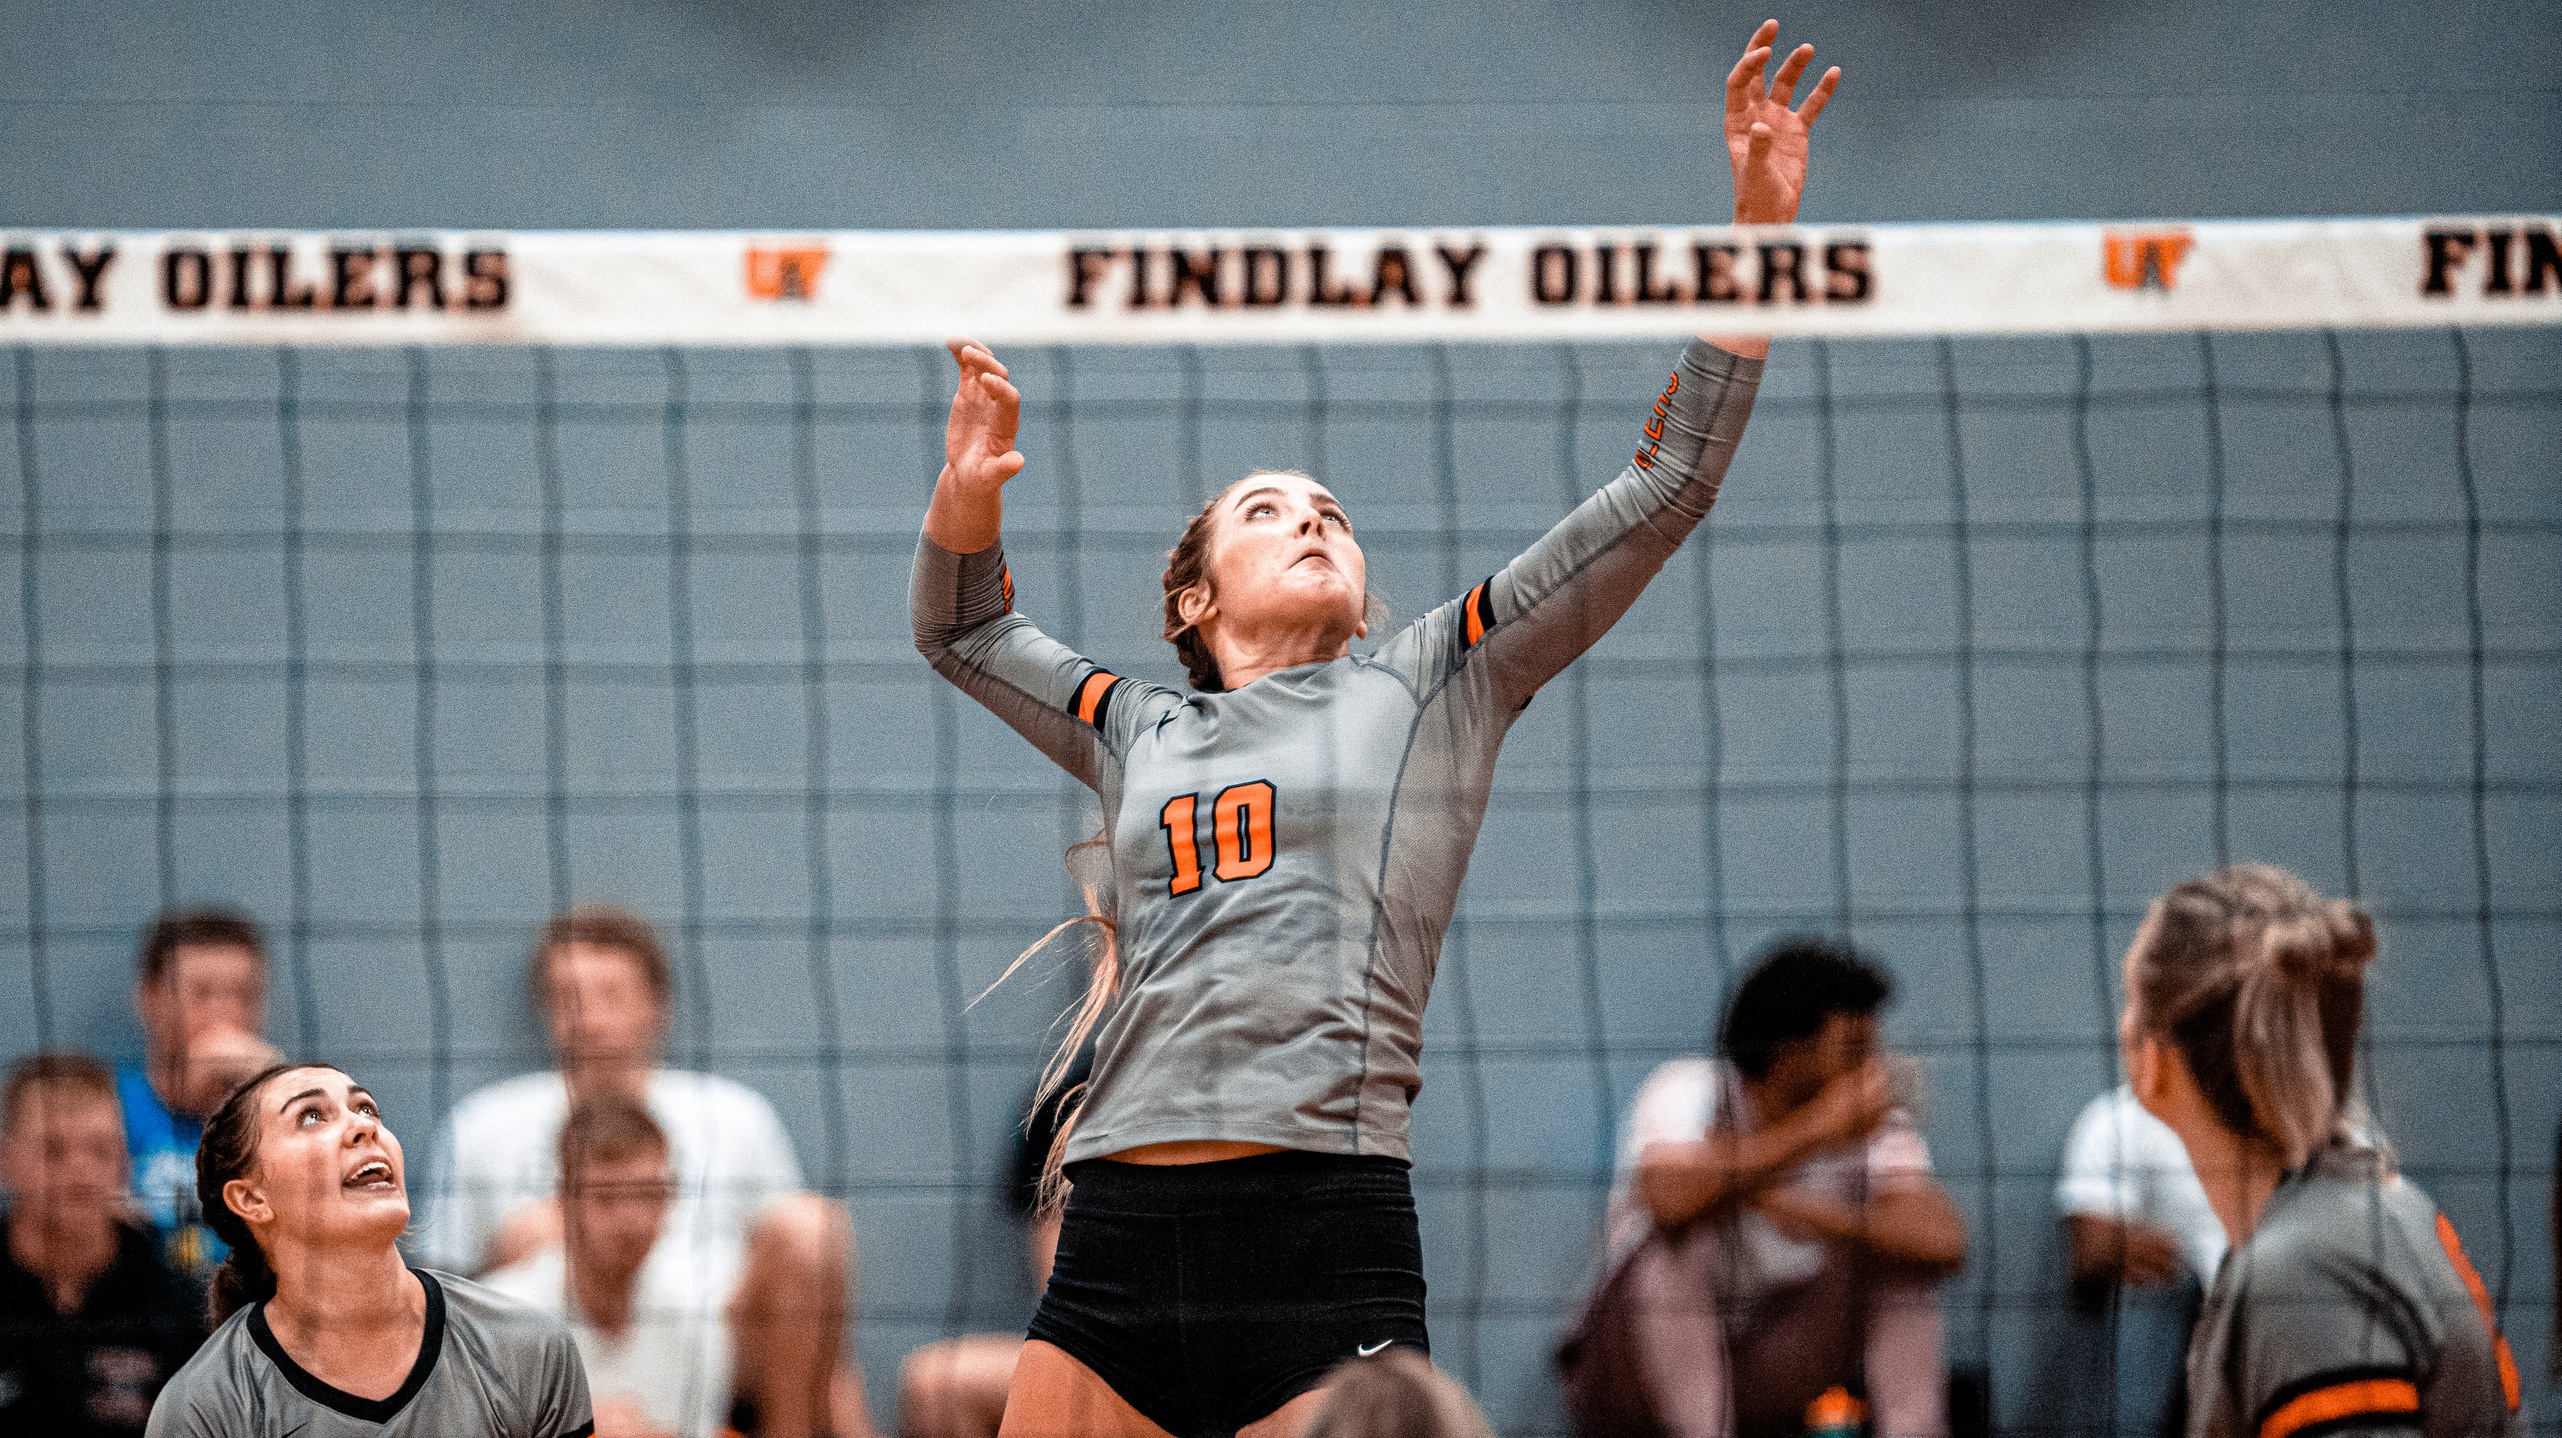 Oilers Take Down Timberwolves in Four Sets